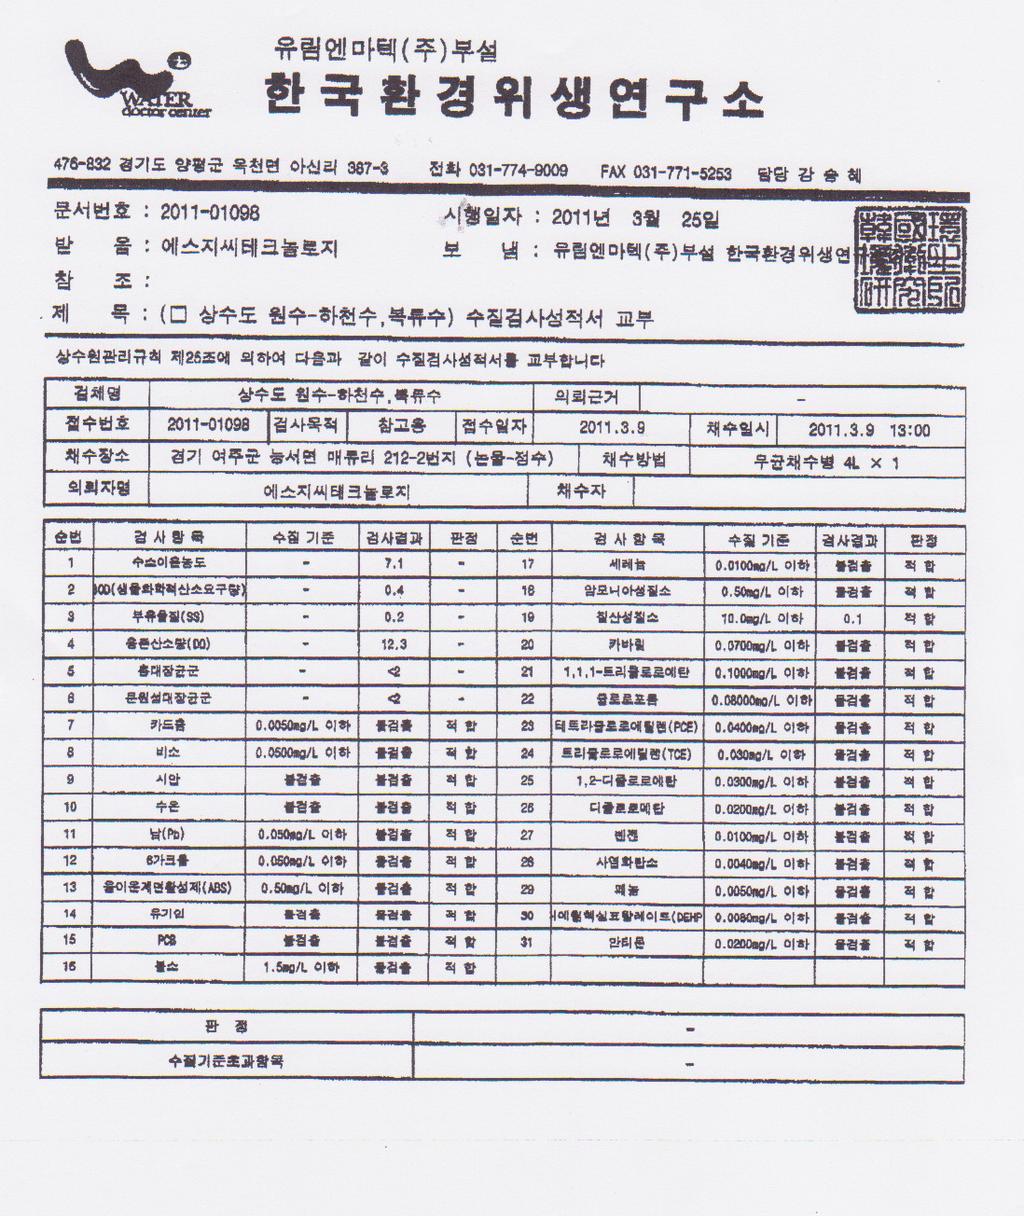 NB: The Test Report from South Korea for the WTM